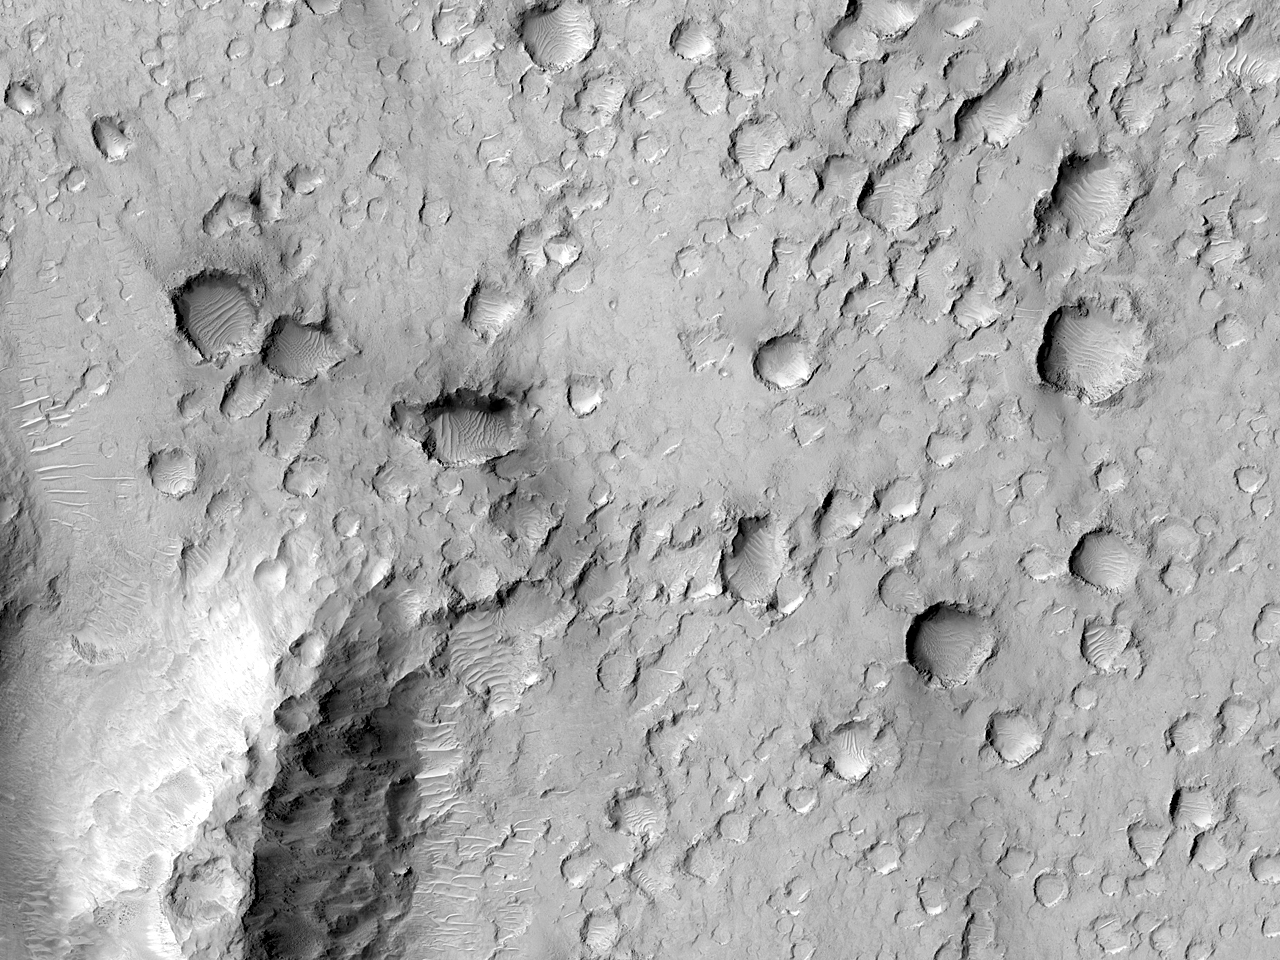 The Eroded Floor of Ares Vallis